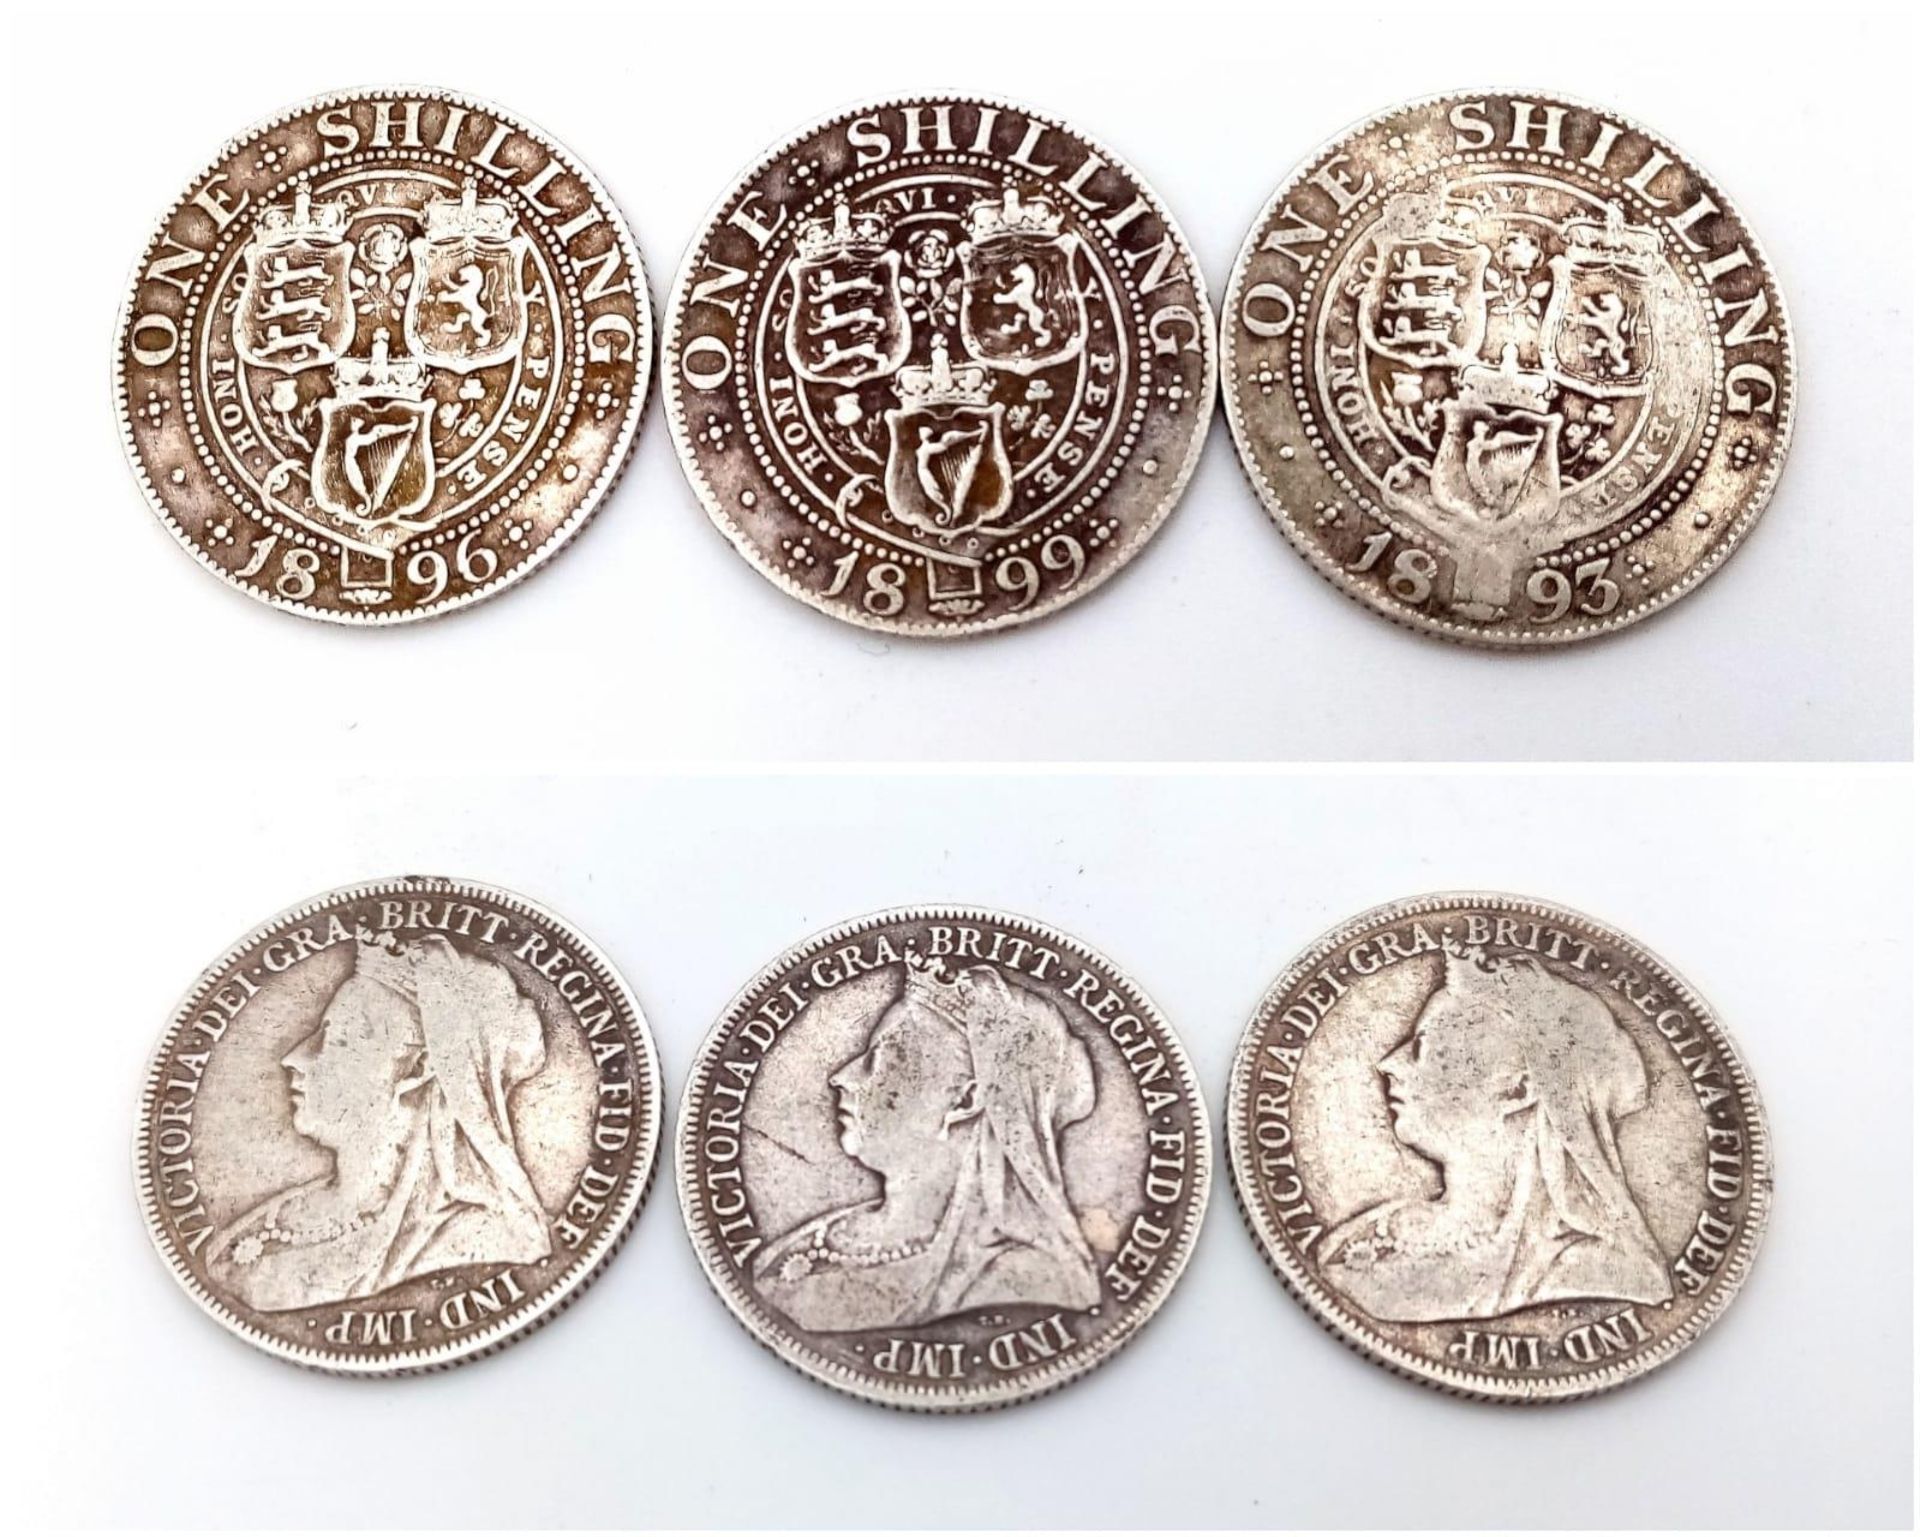 Three Very Good to Fine Queen Victoria Silver Shillings Dates 1893, 1896 & 1899. Gross Weight 16.